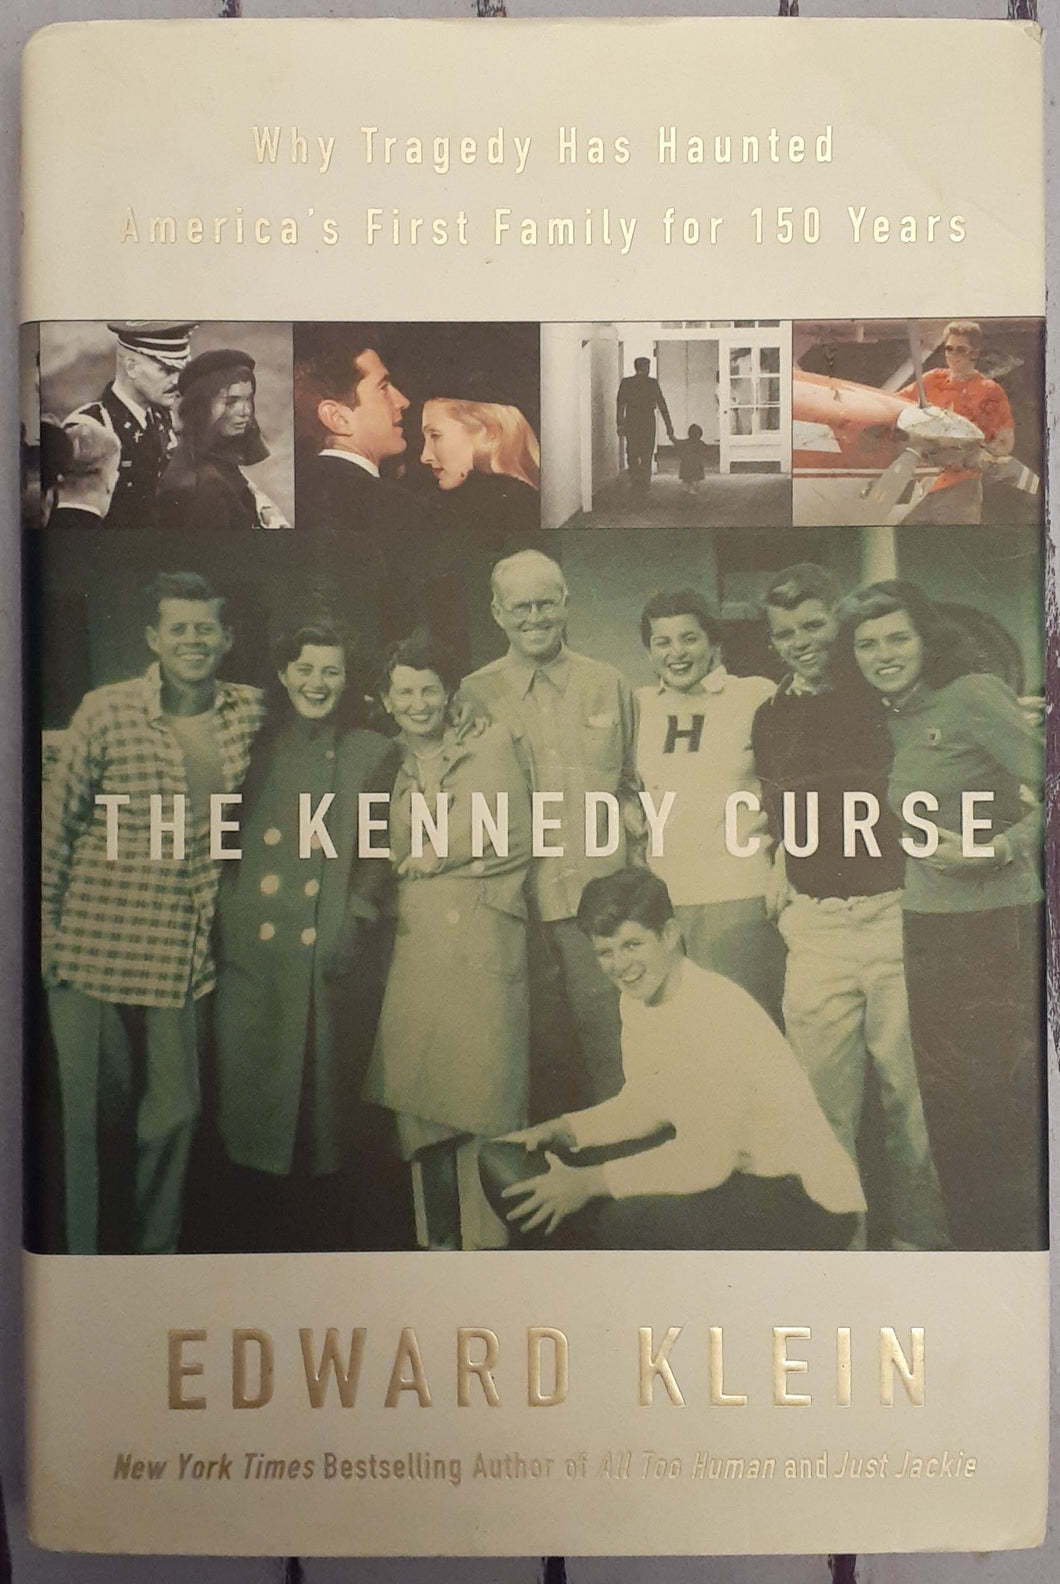 The Kennedy Curse: Why Tragedy Has Haunted America's First Family for 150 Years